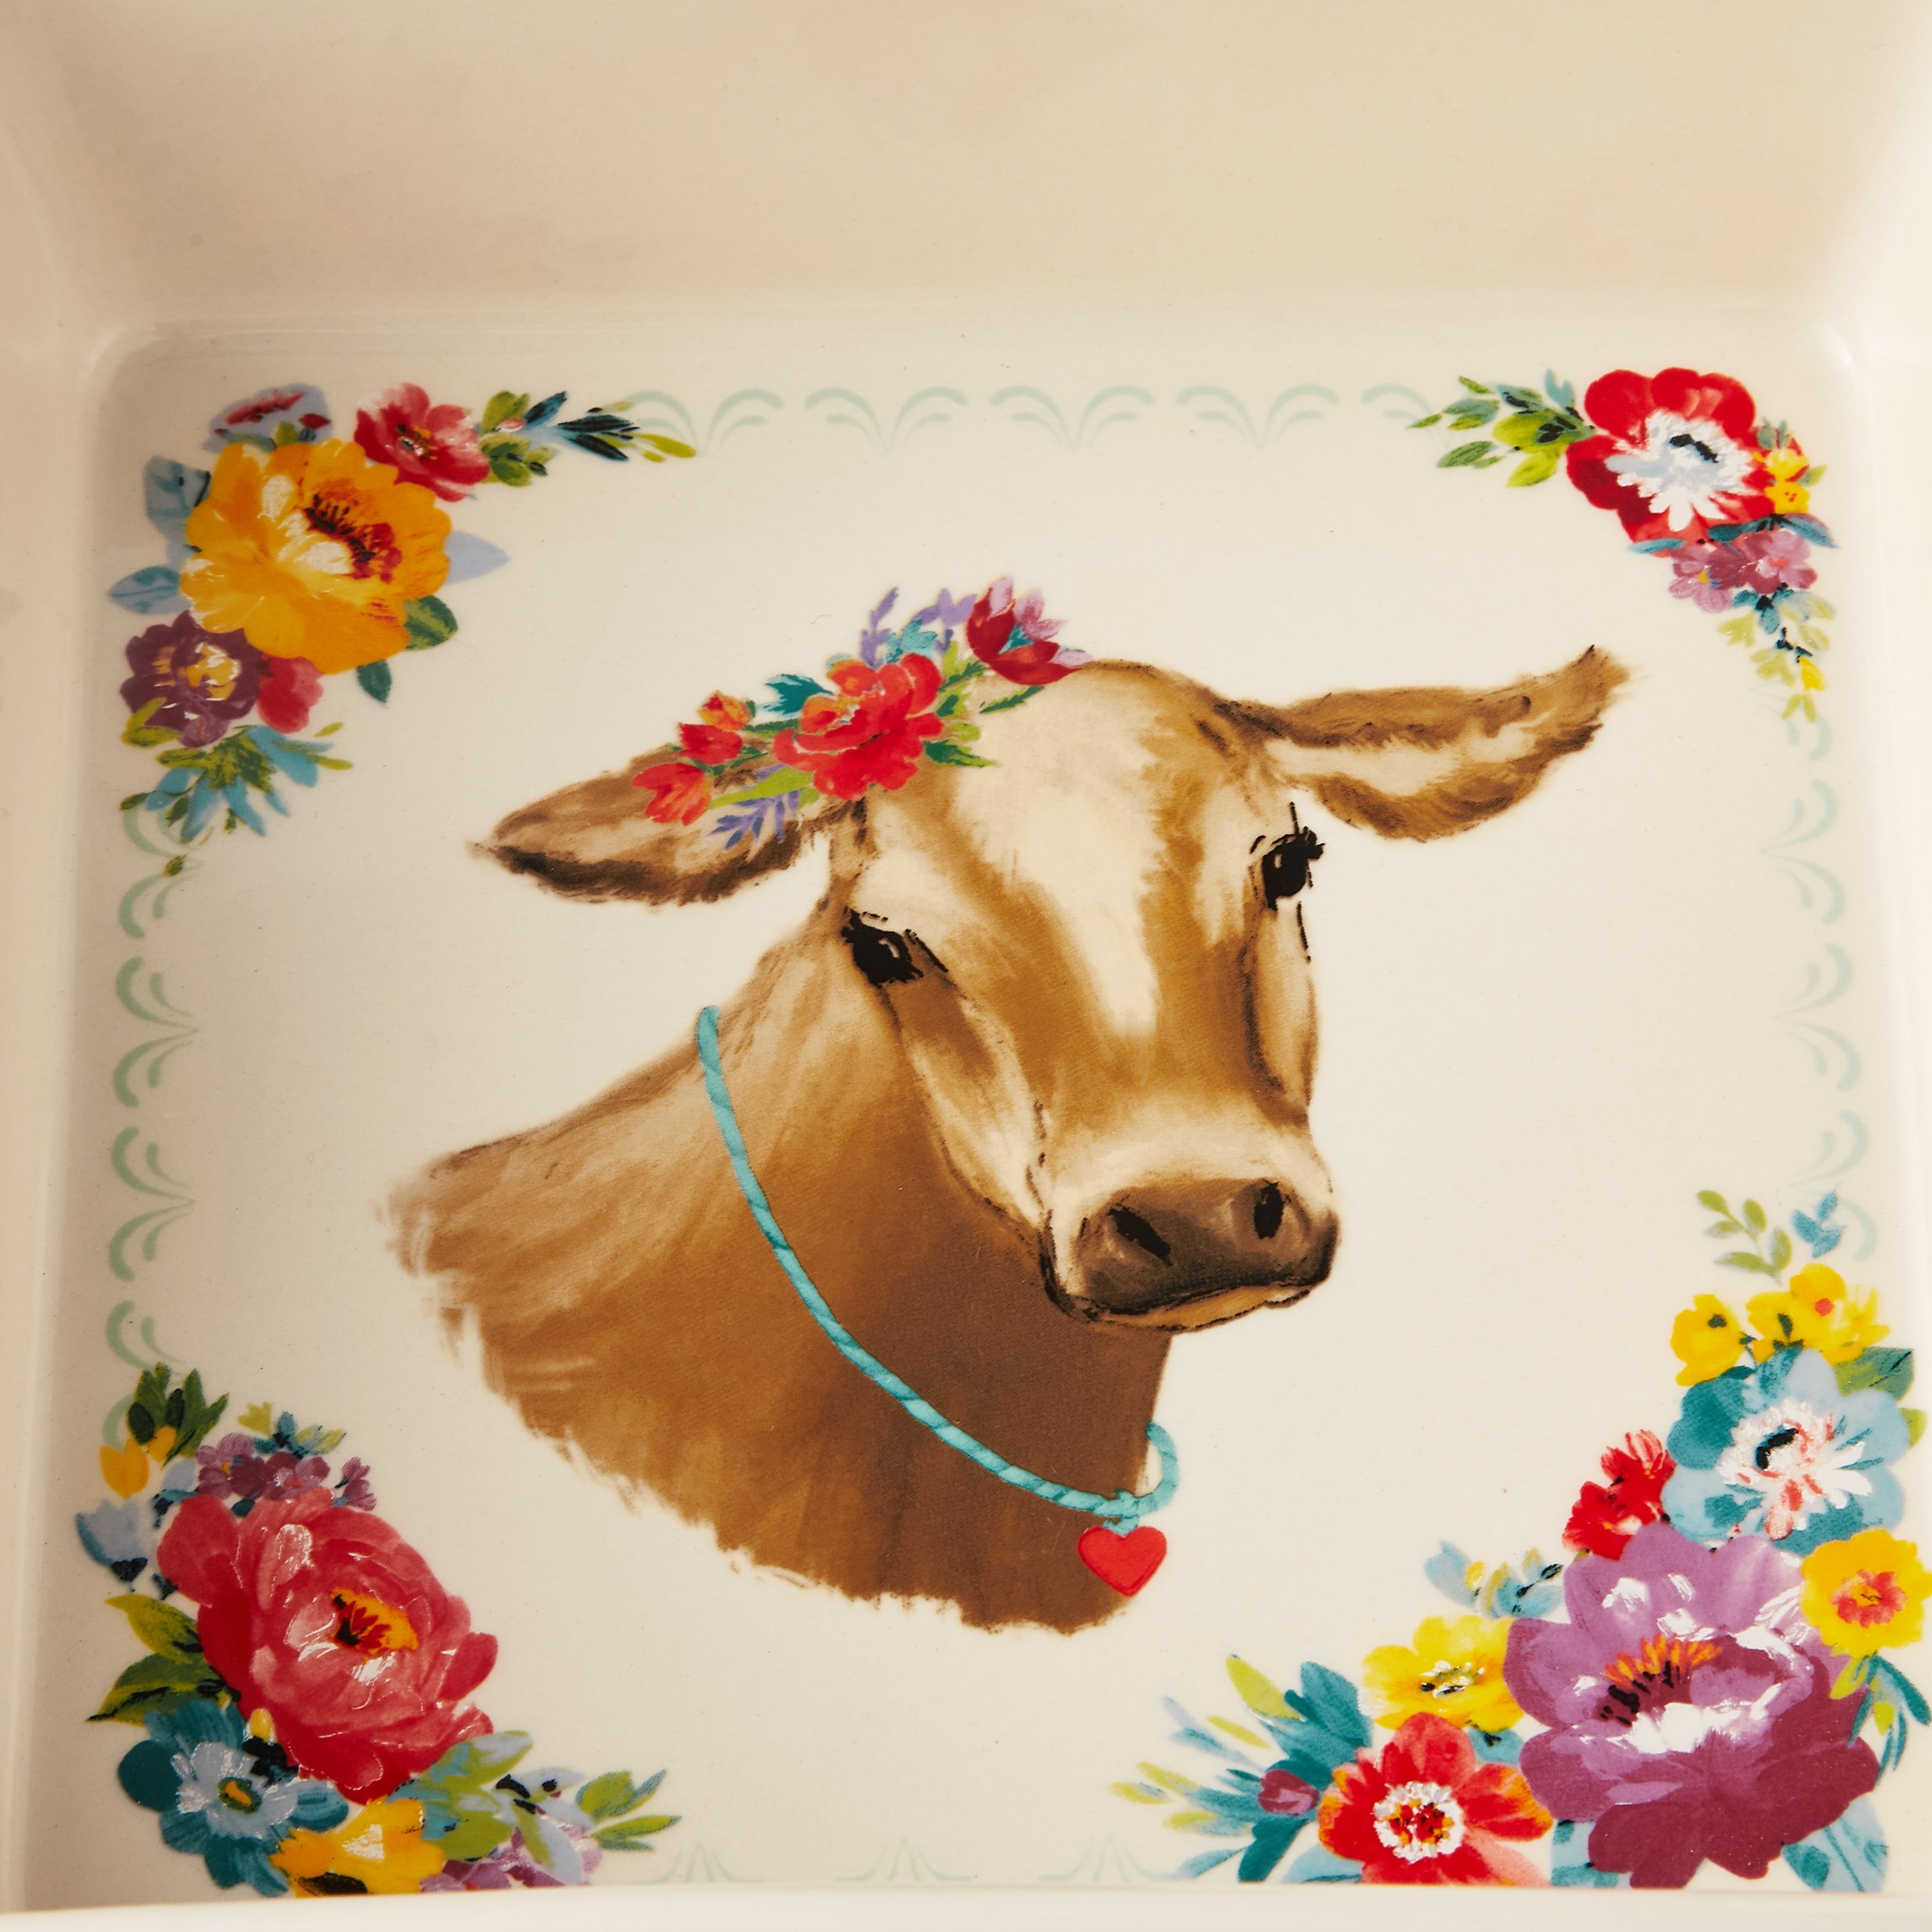 Cows with Mountains Dishwasher art Wallpaper Vinyl